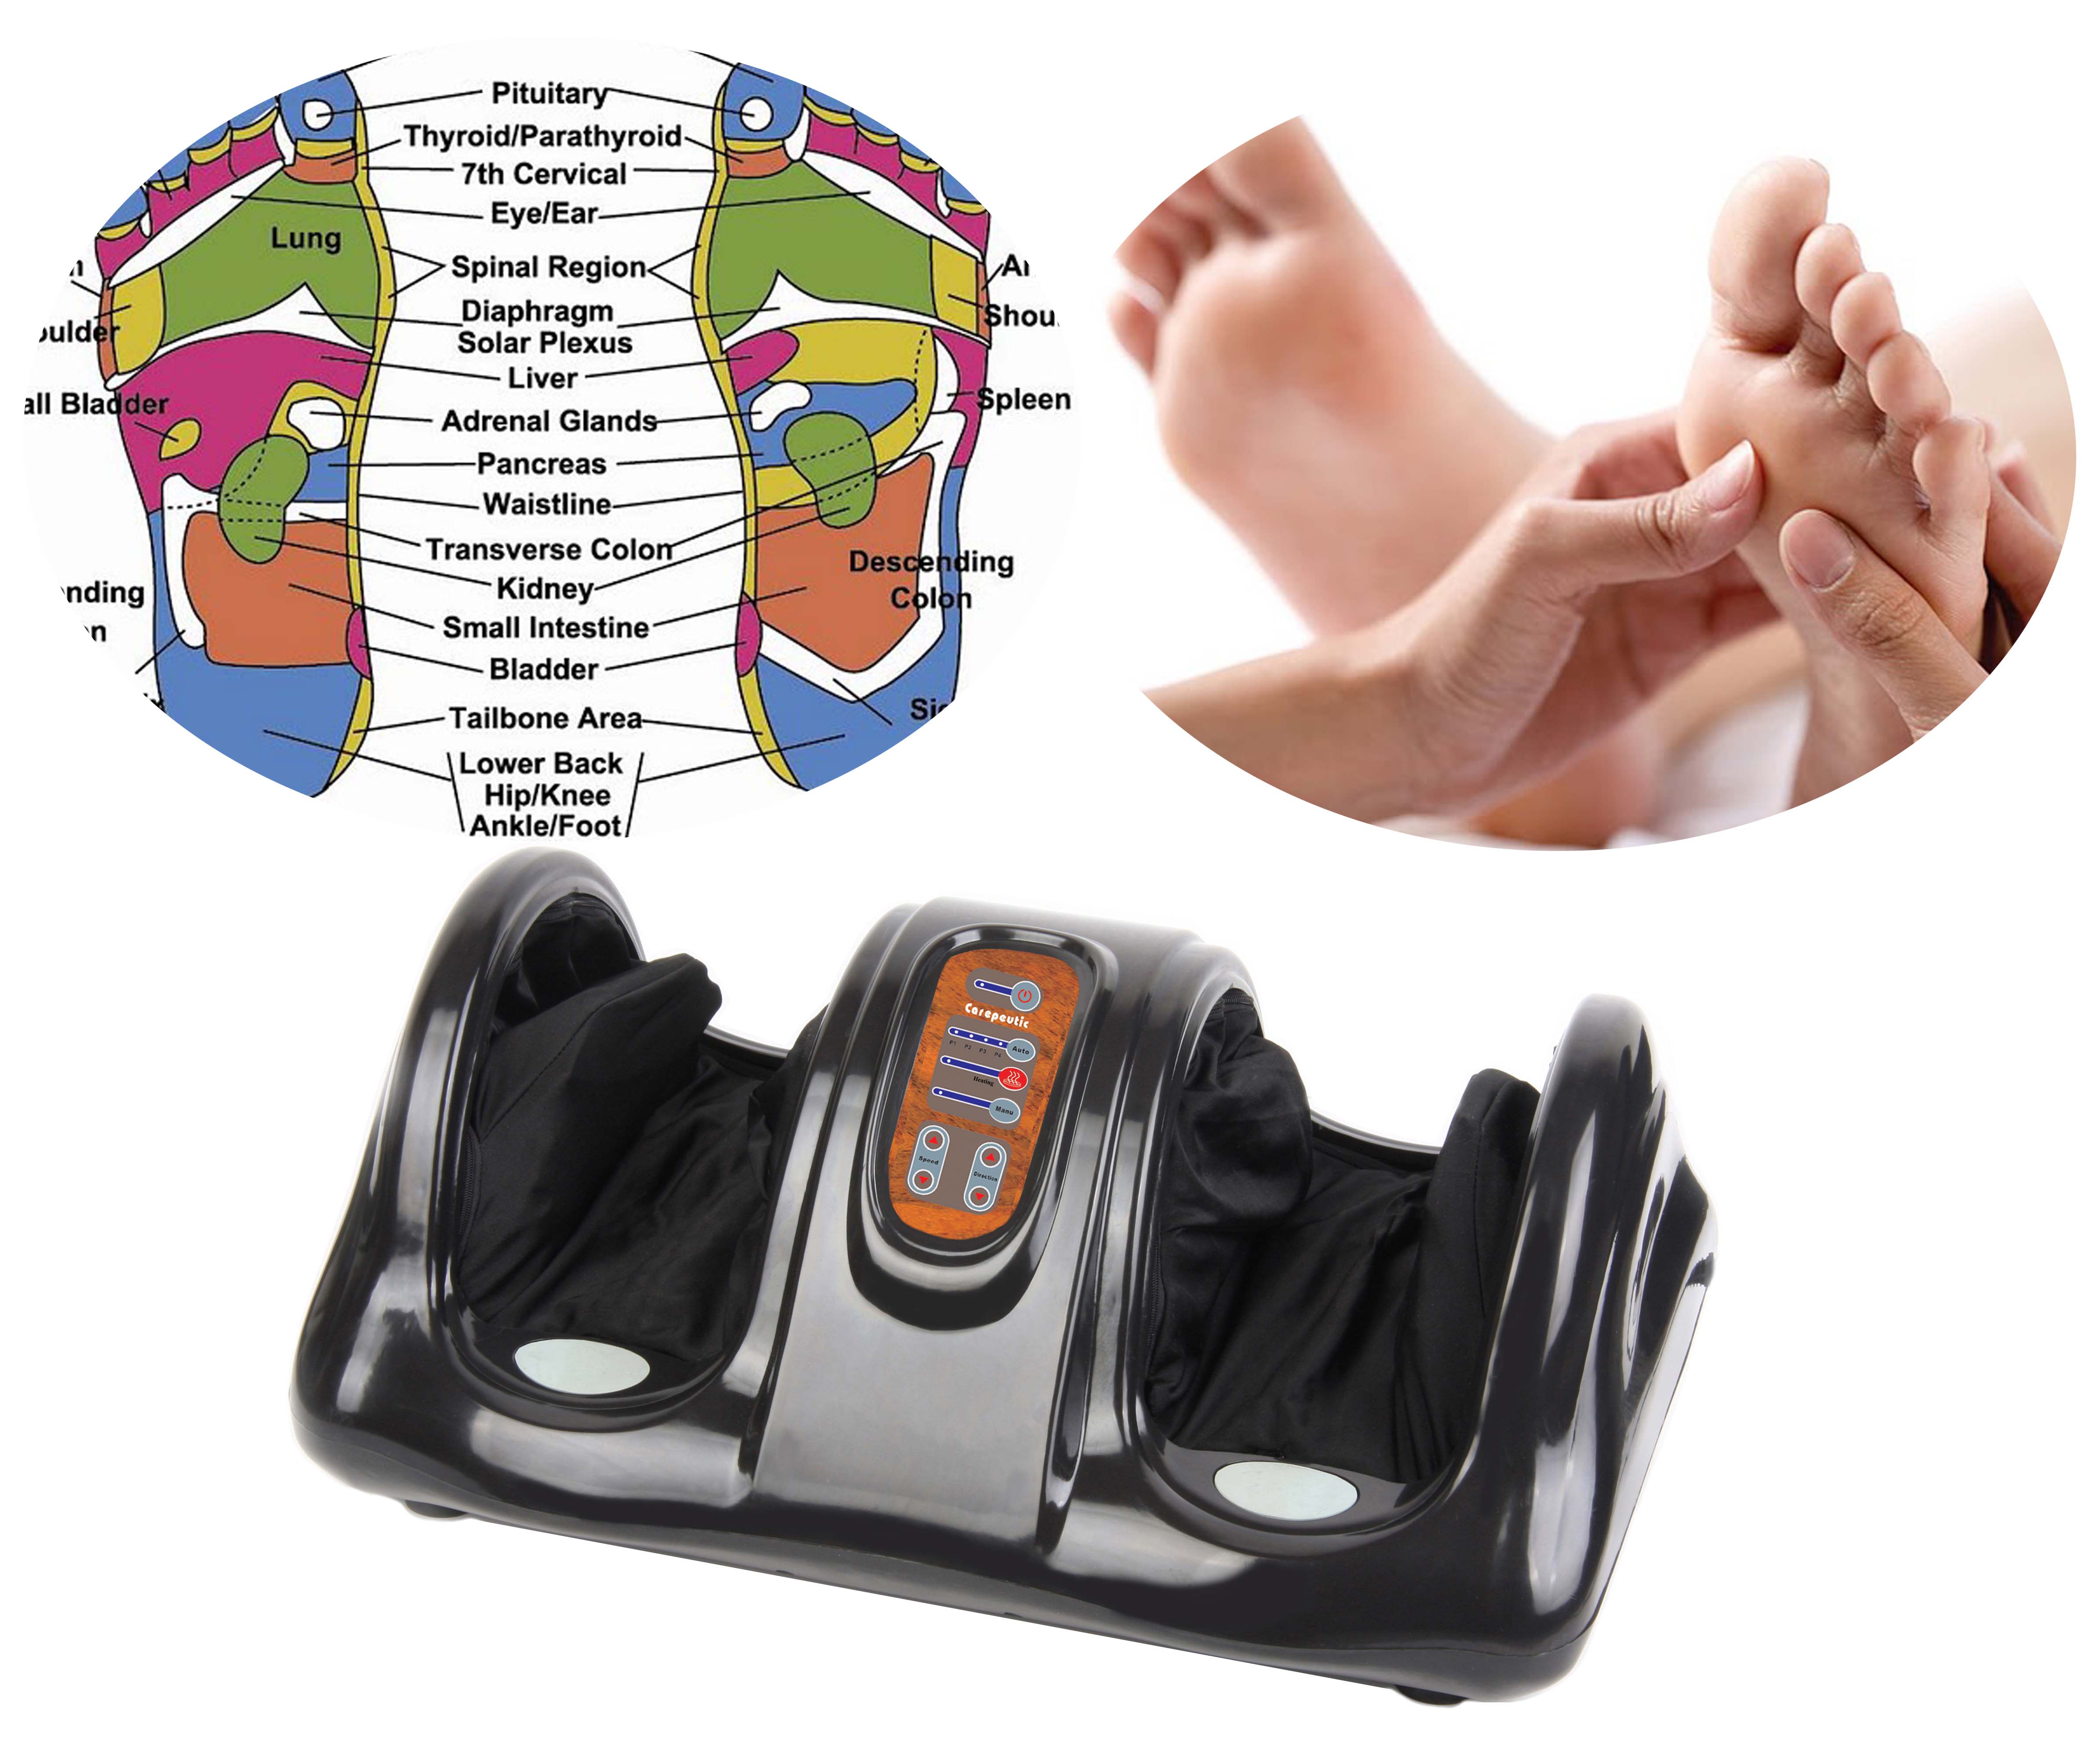 Carepeutic Deluxe Hand Touch Shiatsu Foot Massager with Soothing Warm Therapy